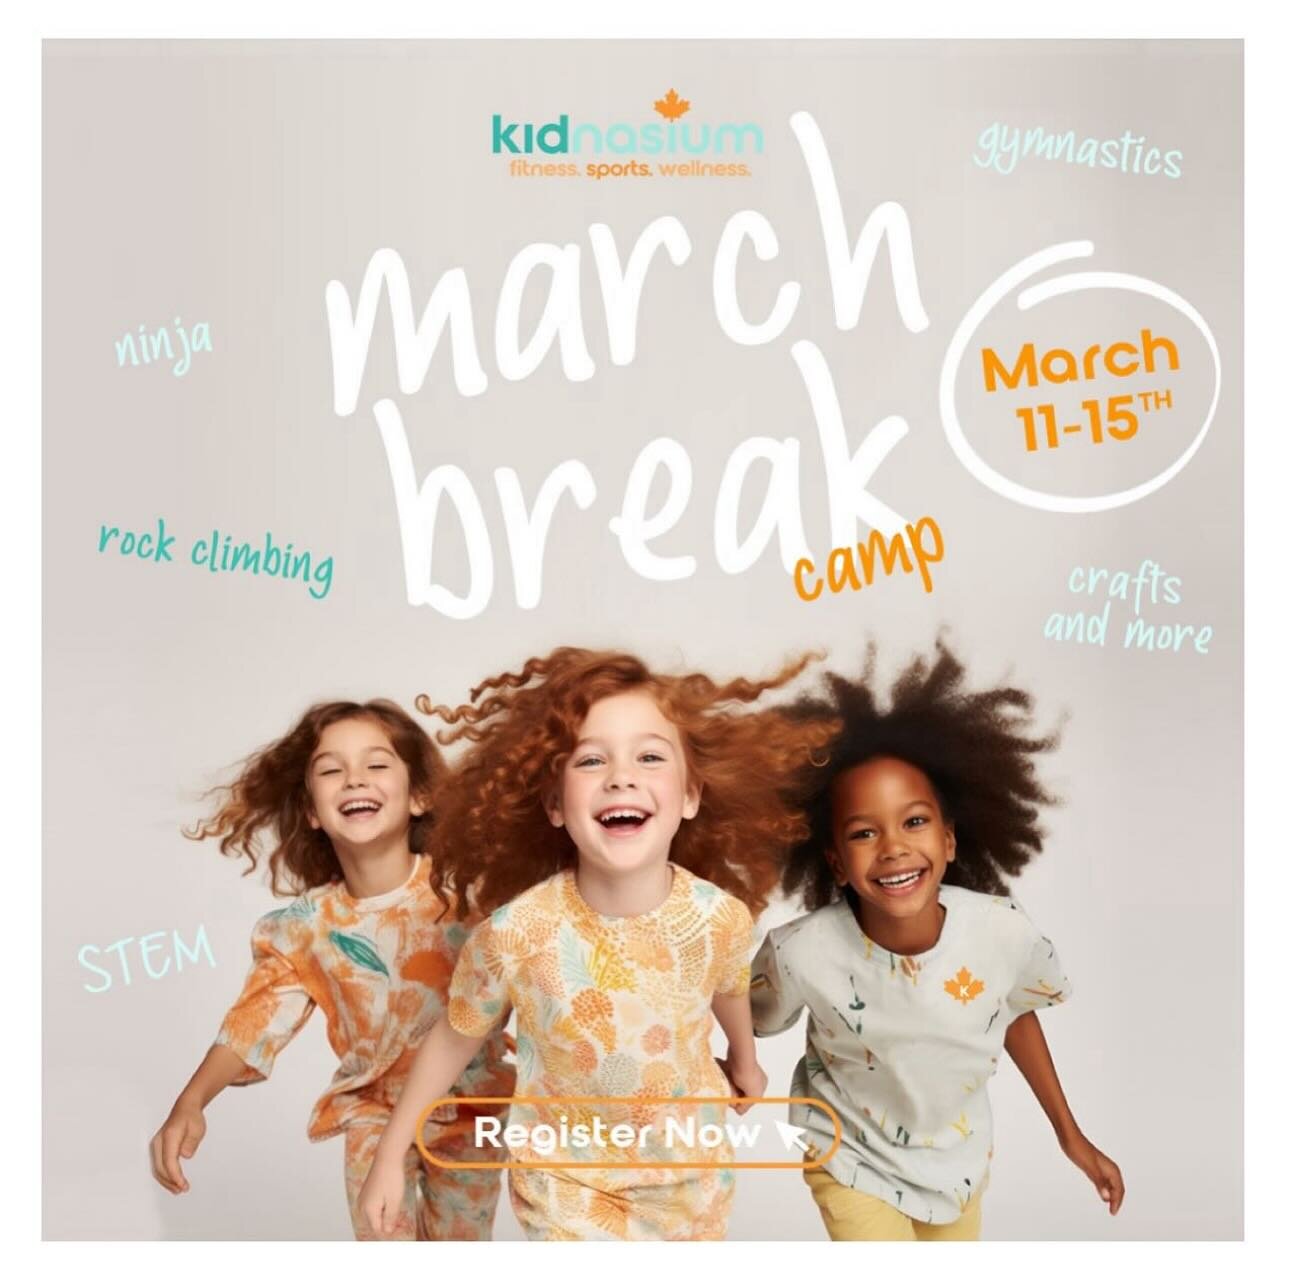 Have you signed up for March Break Camp yet? Join us March 11-15 for March Break camp at both locations. Register now!app.iclasspro.com/portal/kidnasium/camps/2 or learn more at www.kidnasium.ca/marchbreakcamp

#happyhealthyconfidentkids #torontokids